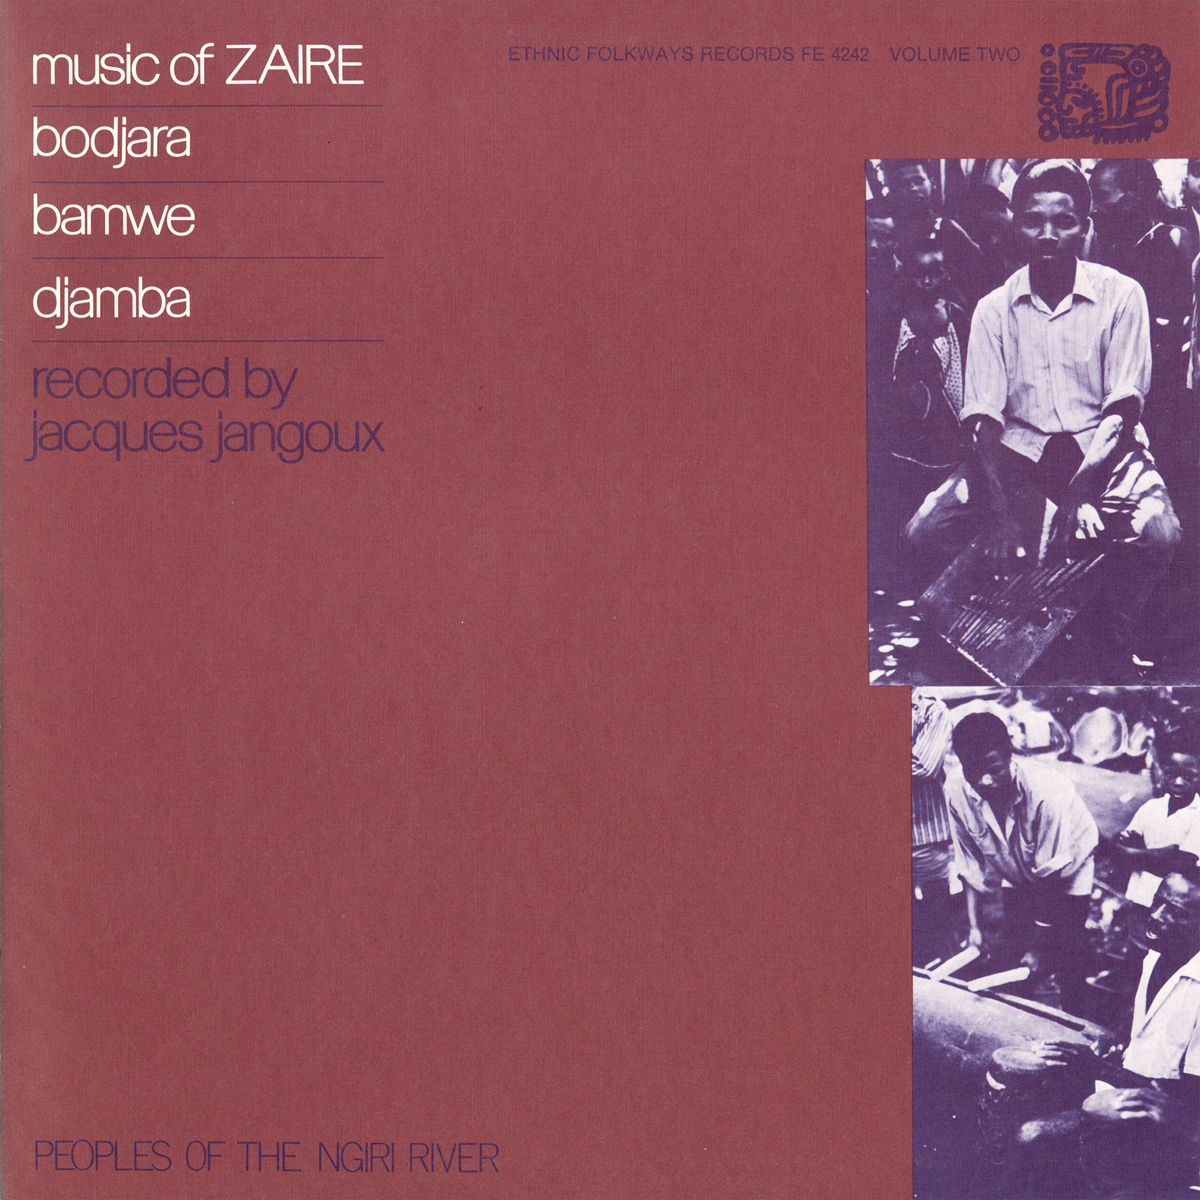 MUSIC OF ZAIRE 2 / VARIOUS